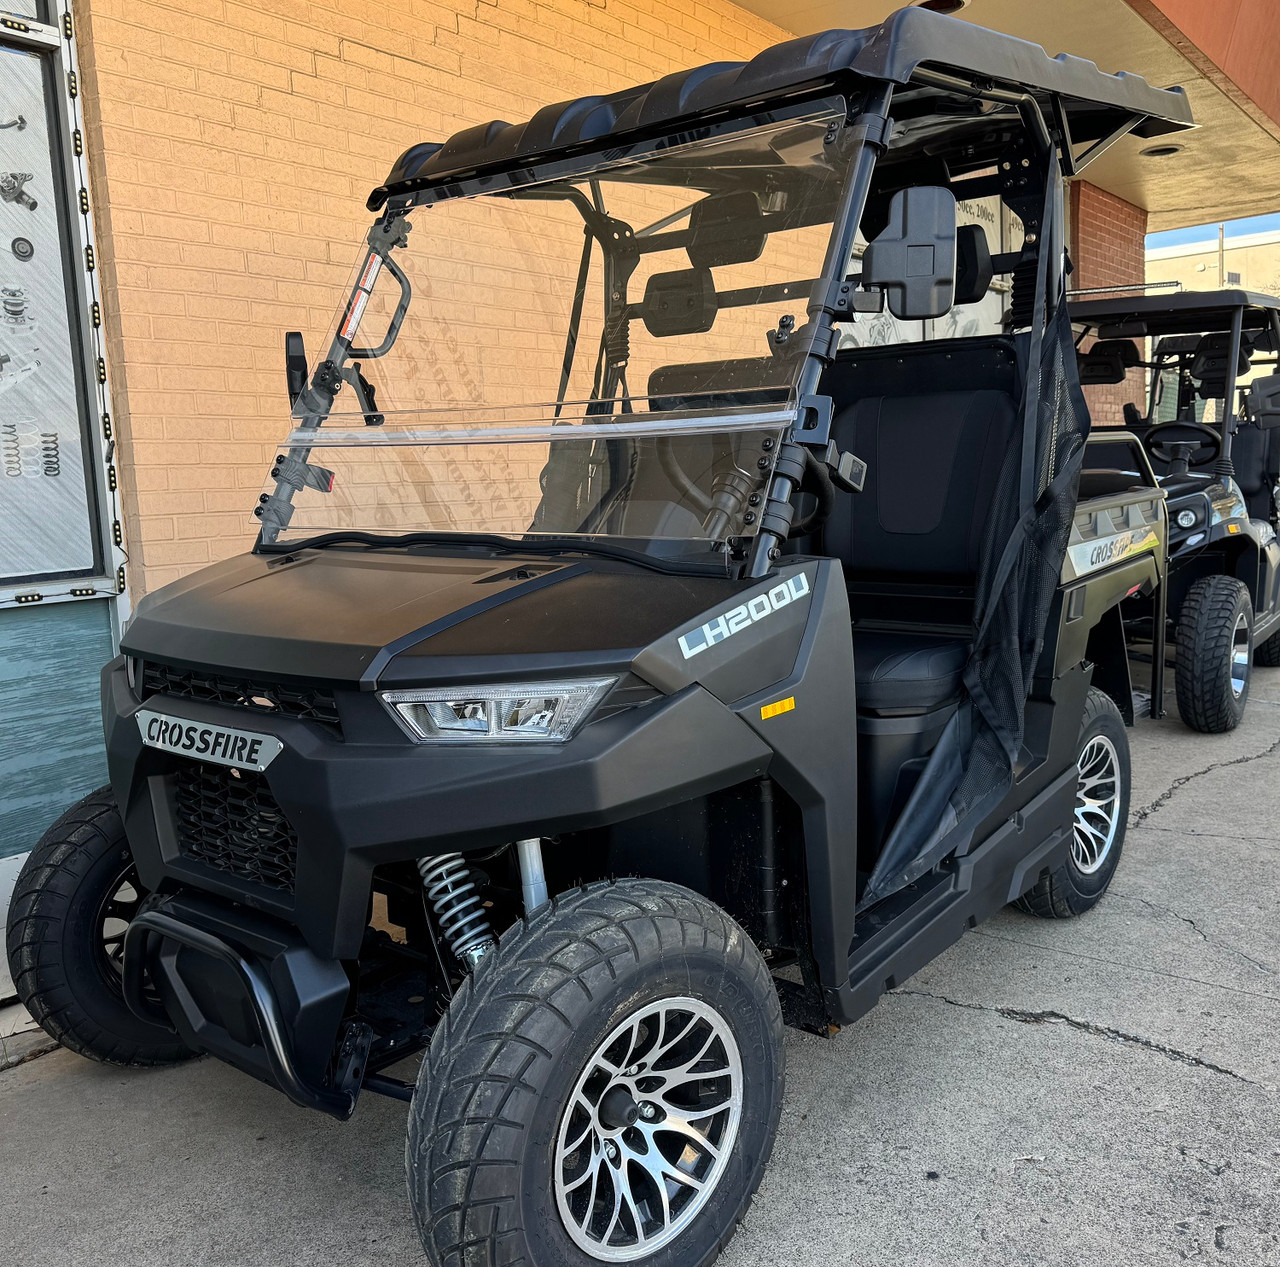 Display Model Linhai Crossfire (No Dump Bed) Adult Golf Cart - Fully Assembled and Tested